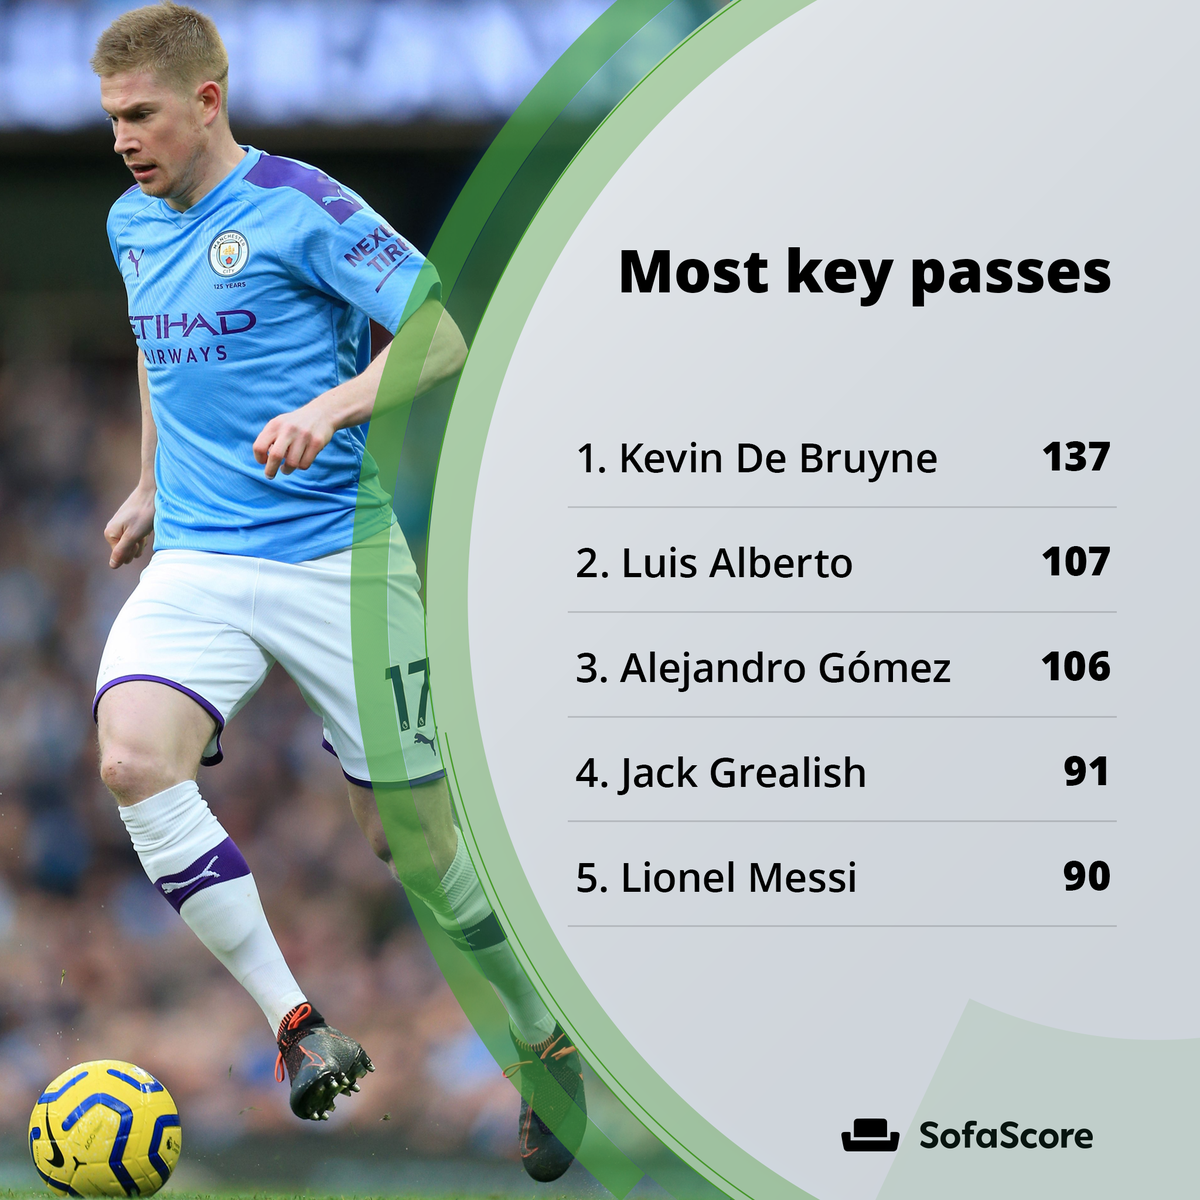 There are 3 different leaders in 3 main creative categories, as Thomas Müller, Lionel Messi and Kevin De Bruyne all had excellent playmaking seasons and find themselves near the top in every category.There's little doubt left - they're clearly the world's best playmakers!